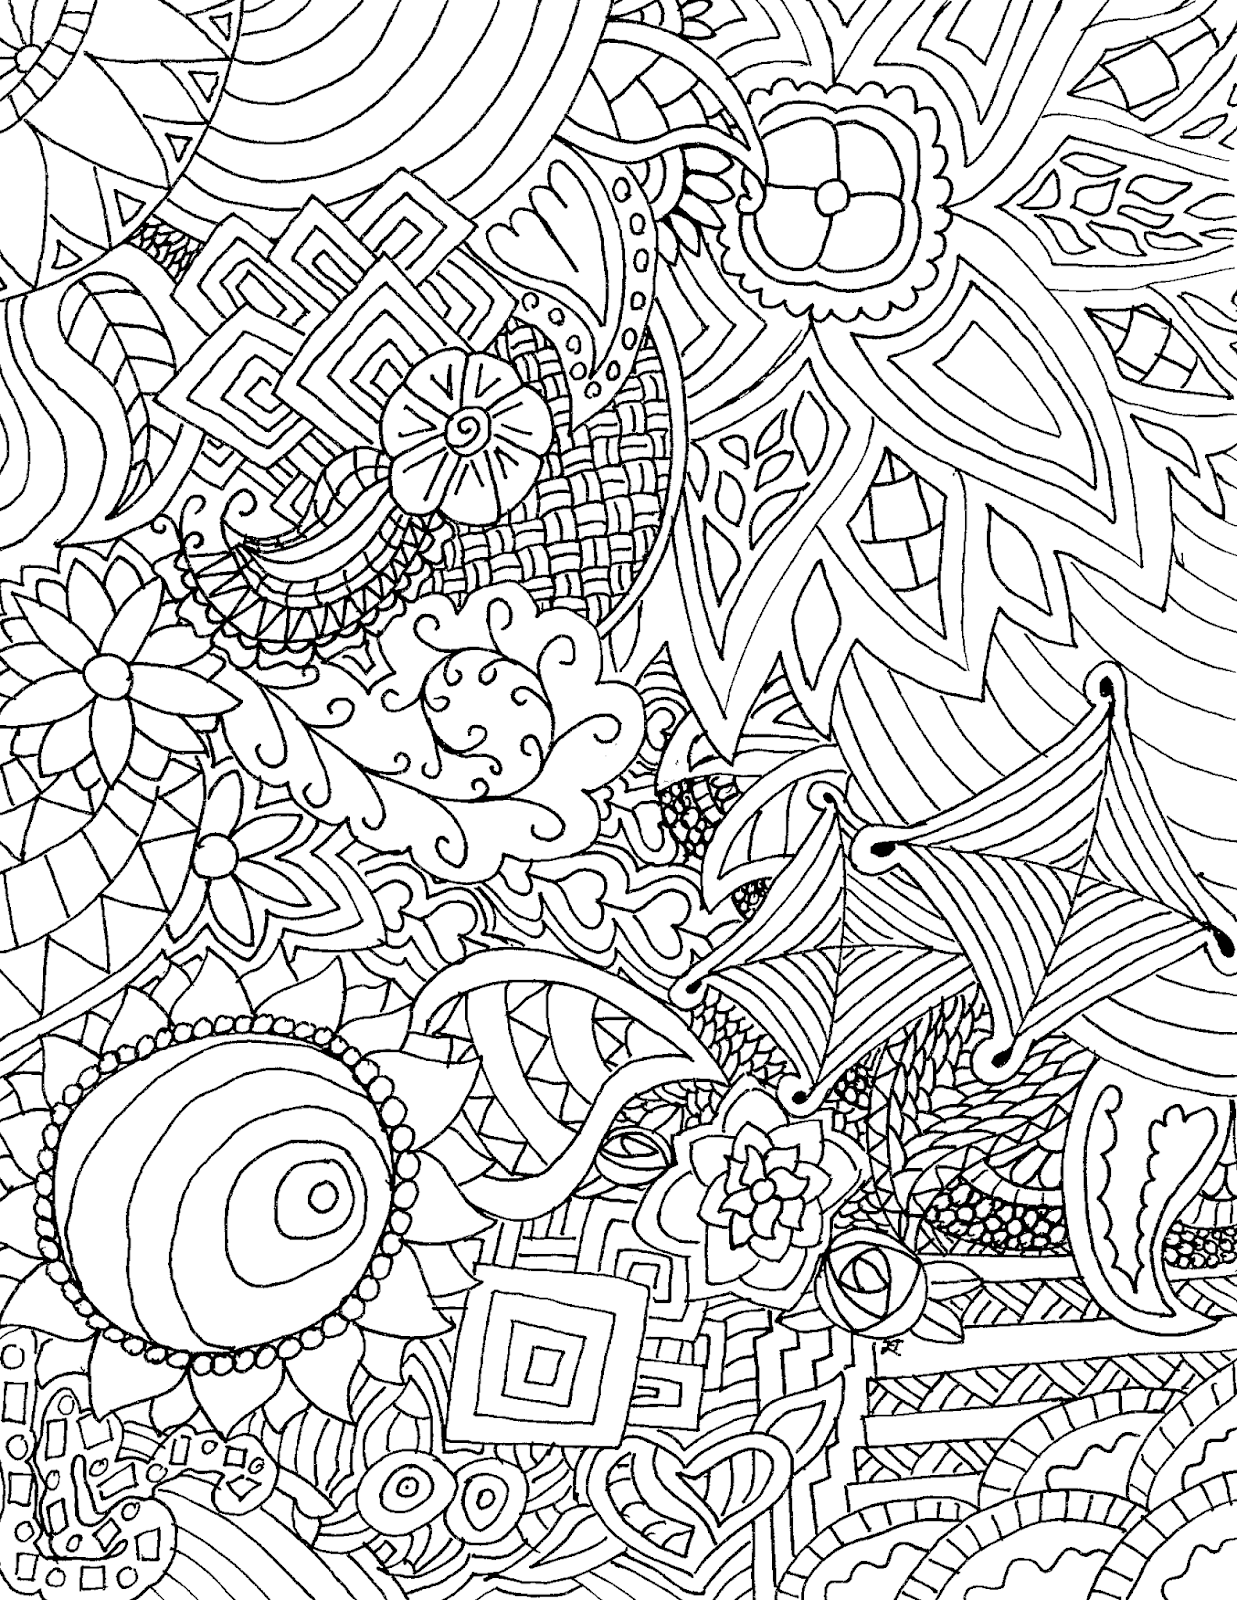 Robin's Great Coloring Pages: Zentangles to Color part 3